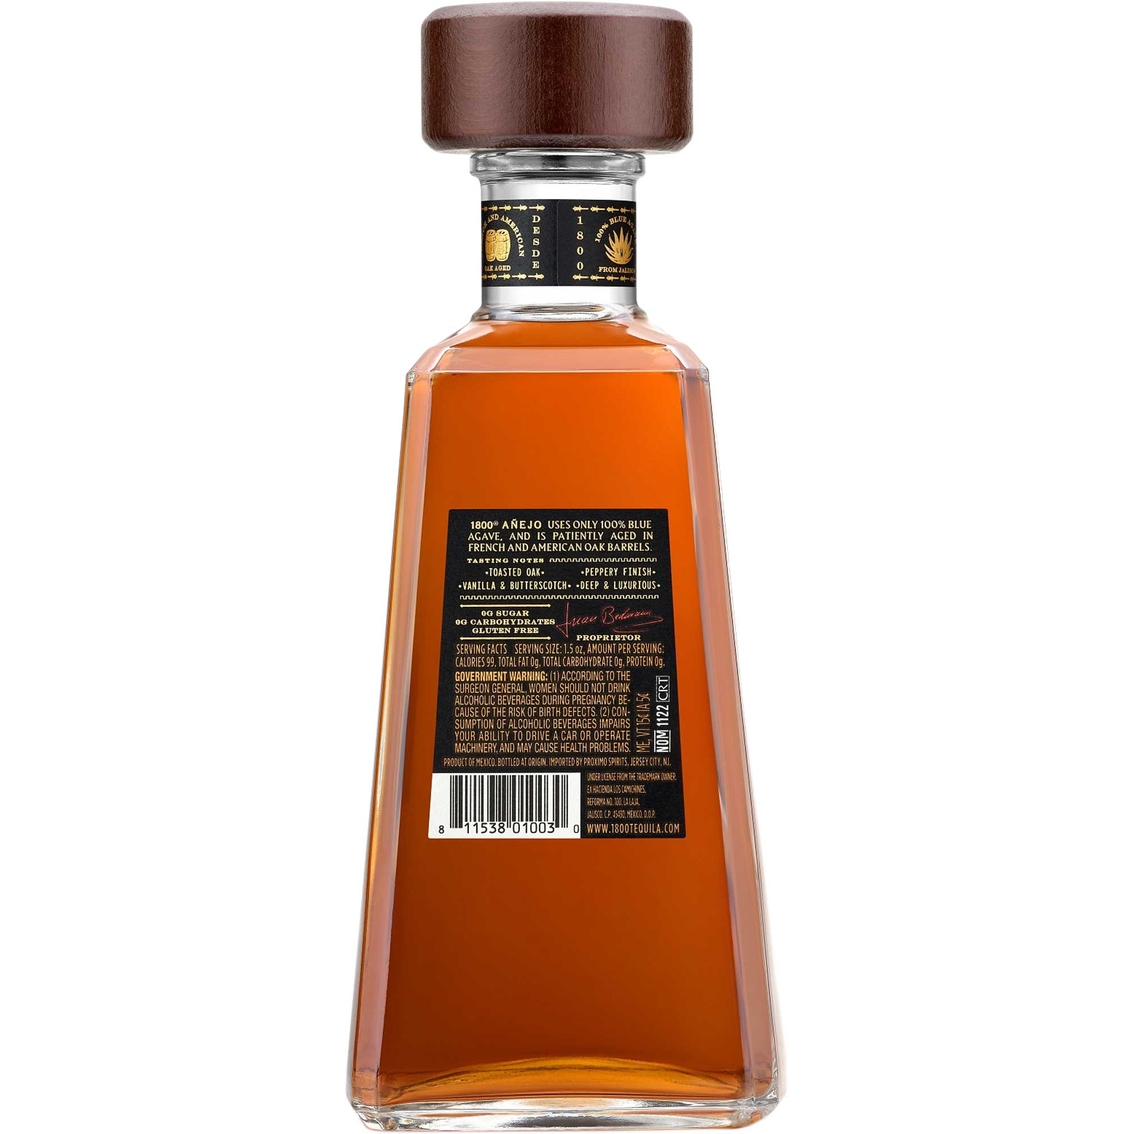 1800 Anejo Tequila 750ml - Image 2 of 2